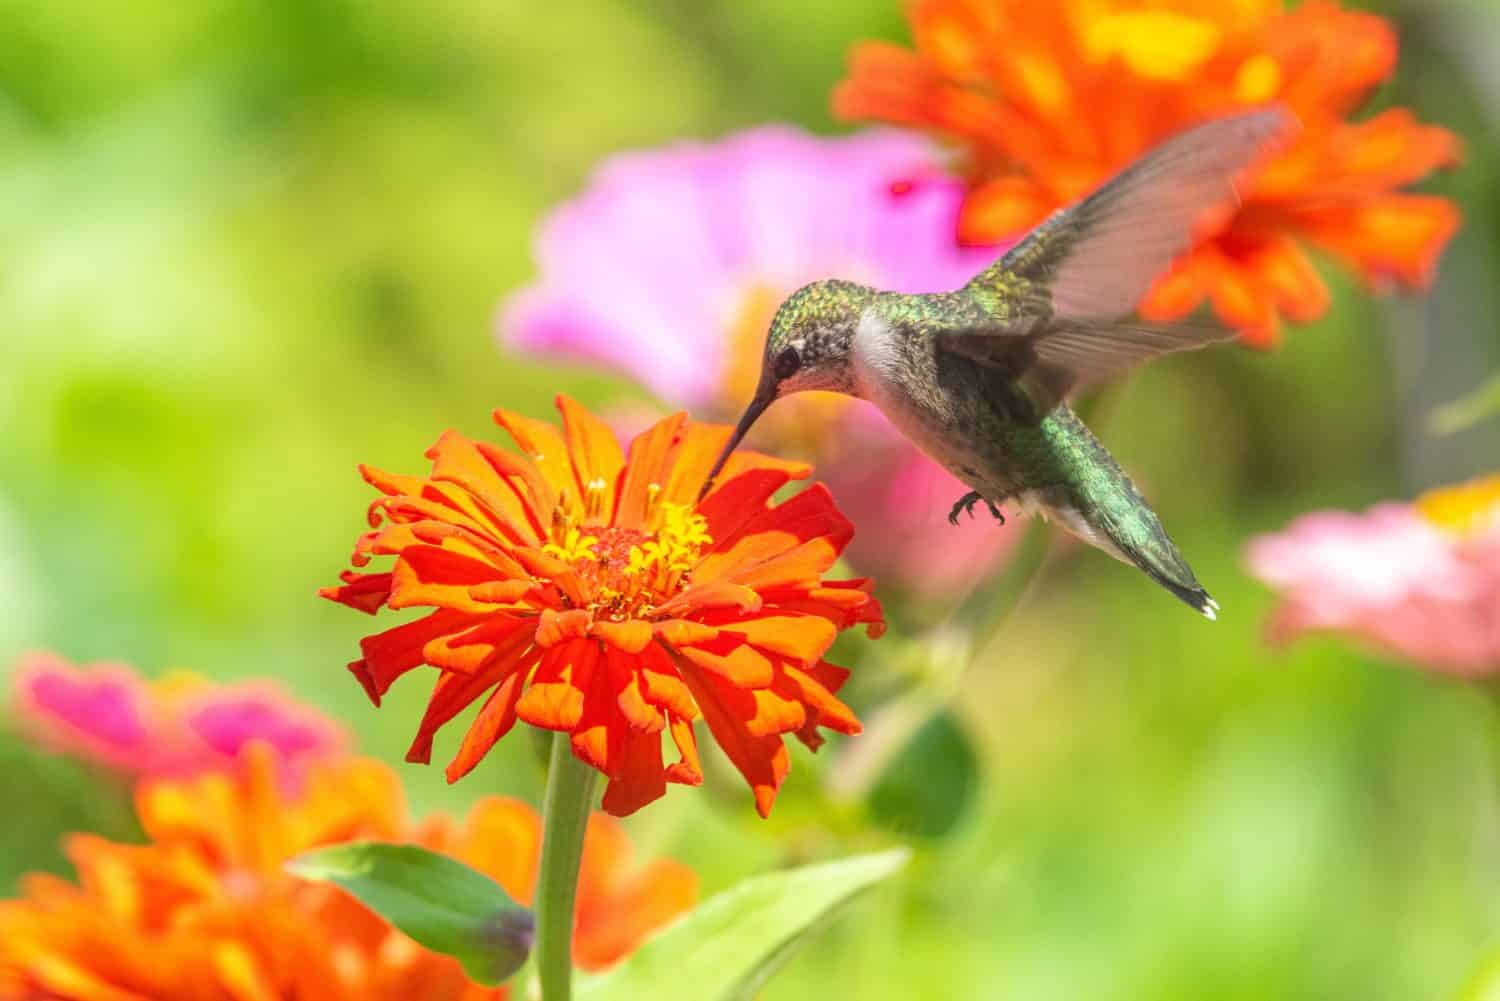 Ruby throated hummingbird sipping nectar from orange zinnia flower blooming in garden